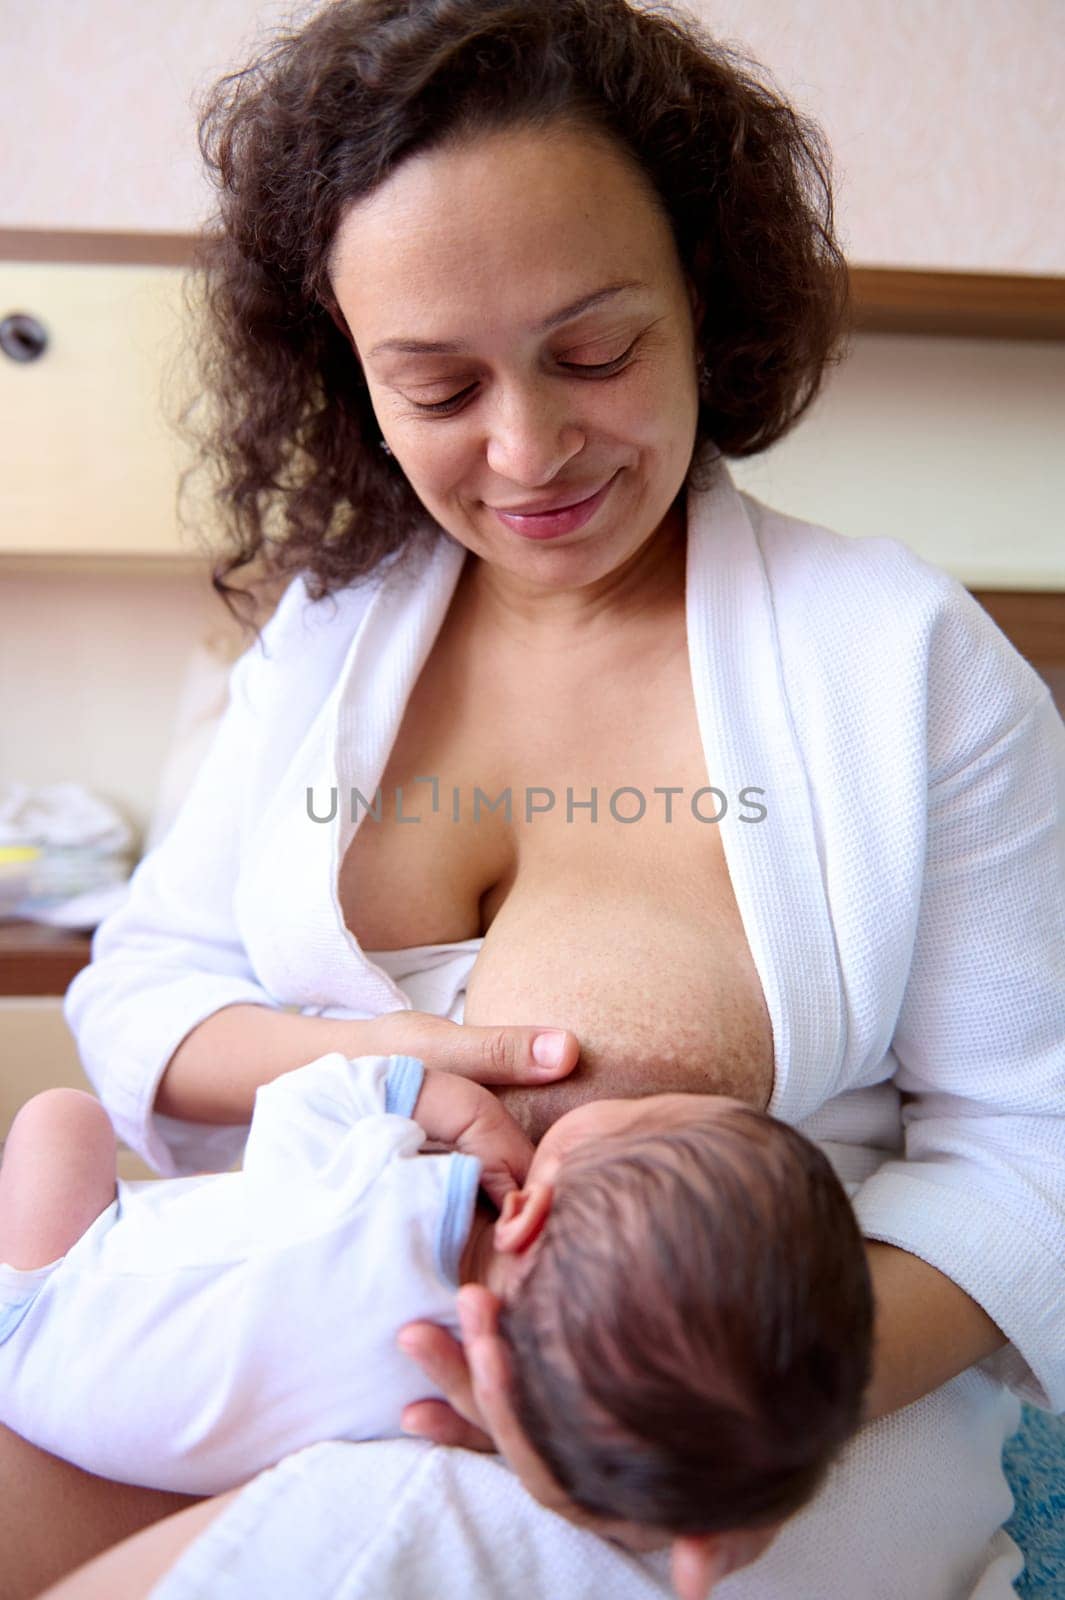 Young curly haired multi ethnic woman, loving caring mother holding and breastfeeding her newborn baby, sitting on the bed in white bedchamber interior. Family relationships. Maternity lifestyle